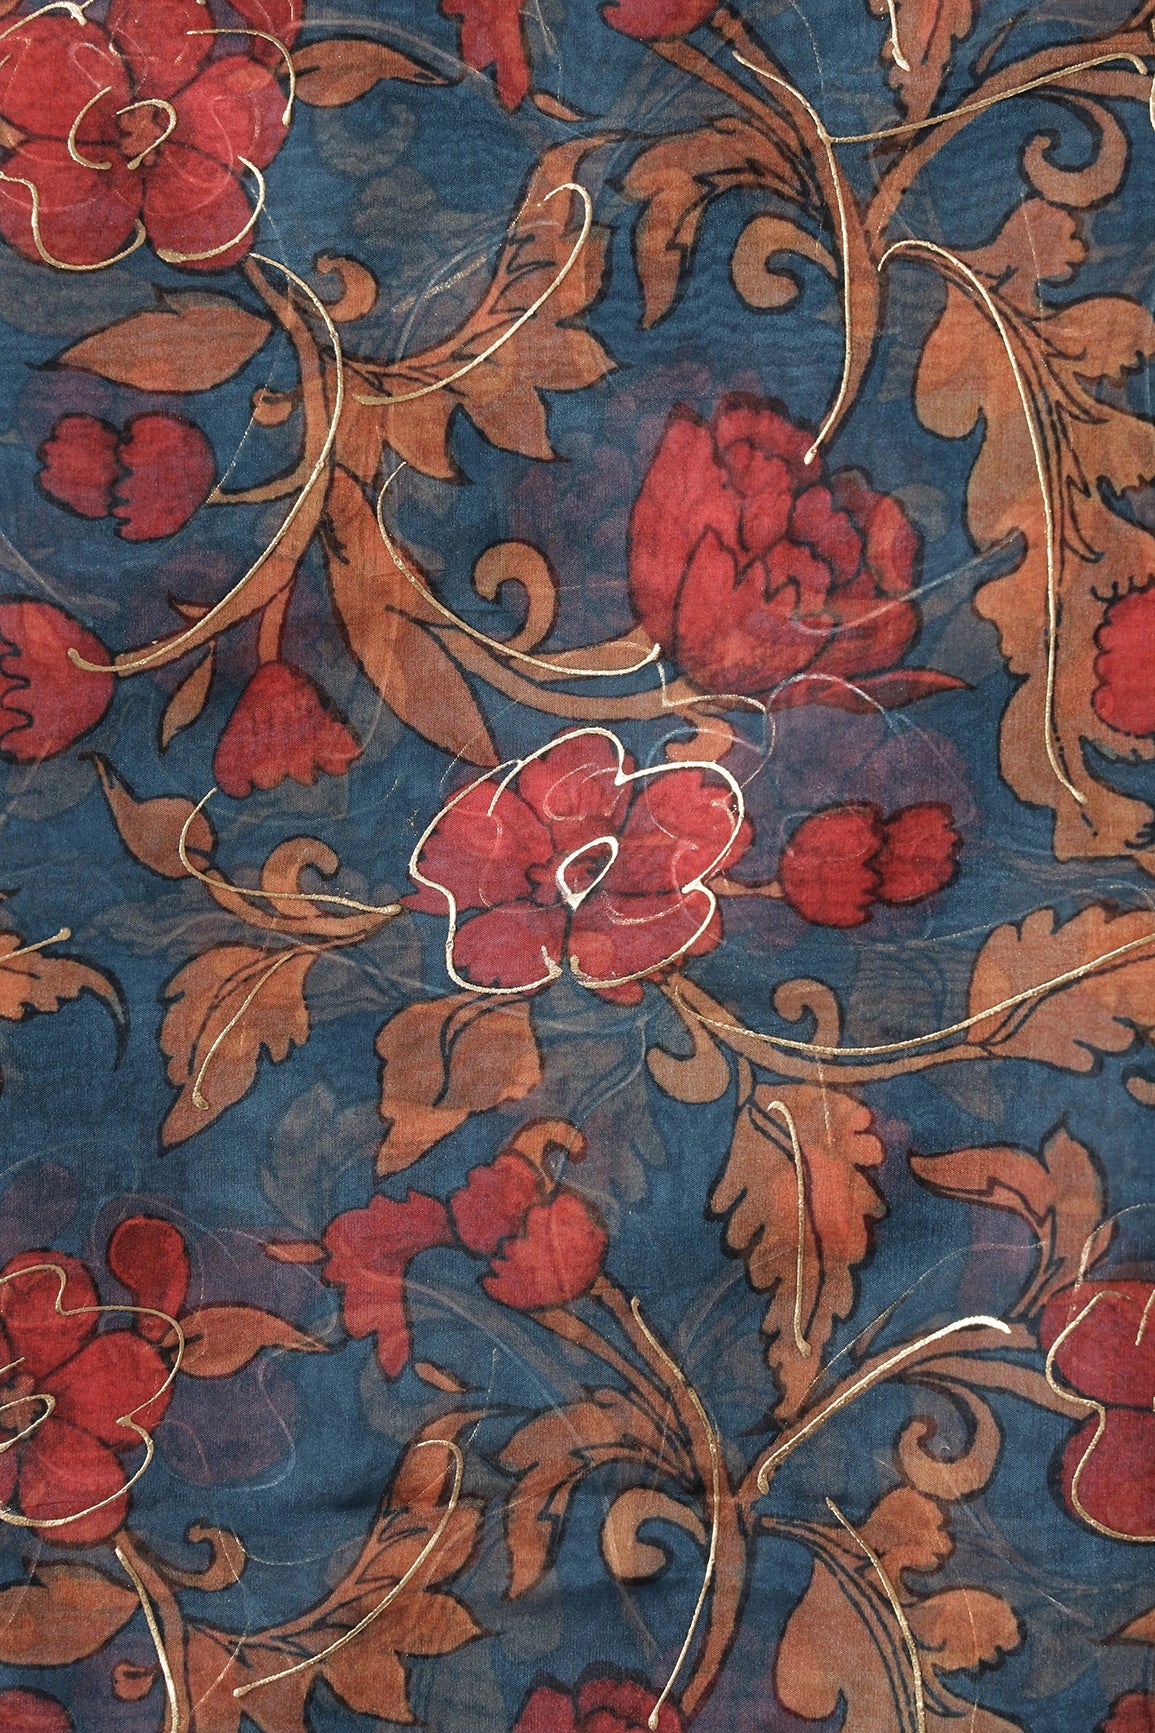 Red And Orange Floral Digital Foil Print On Prussian Blue Organza Fabric